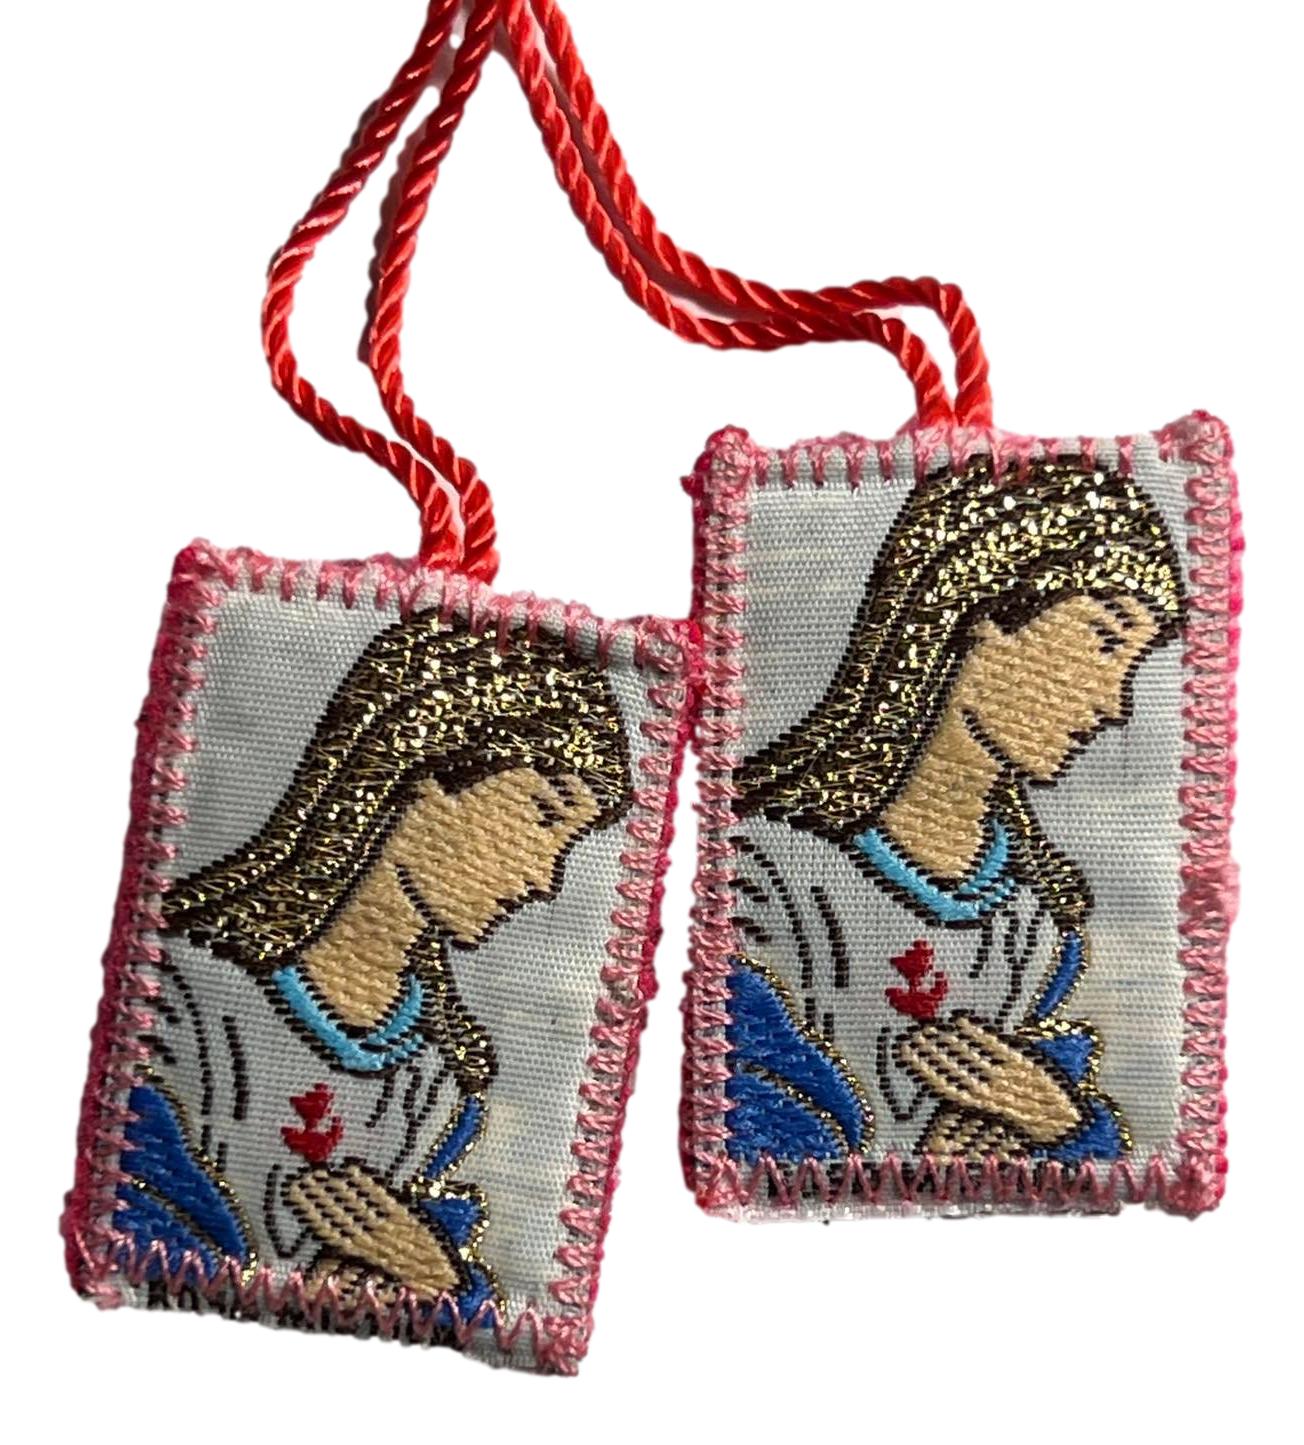 Scapular Immaculate Heart of Mary Pink Wool Backing Cord .75 x 1.25 Inches - Ysleta Mission Gift Shop- VOTED El Paso's Best Gift Shop